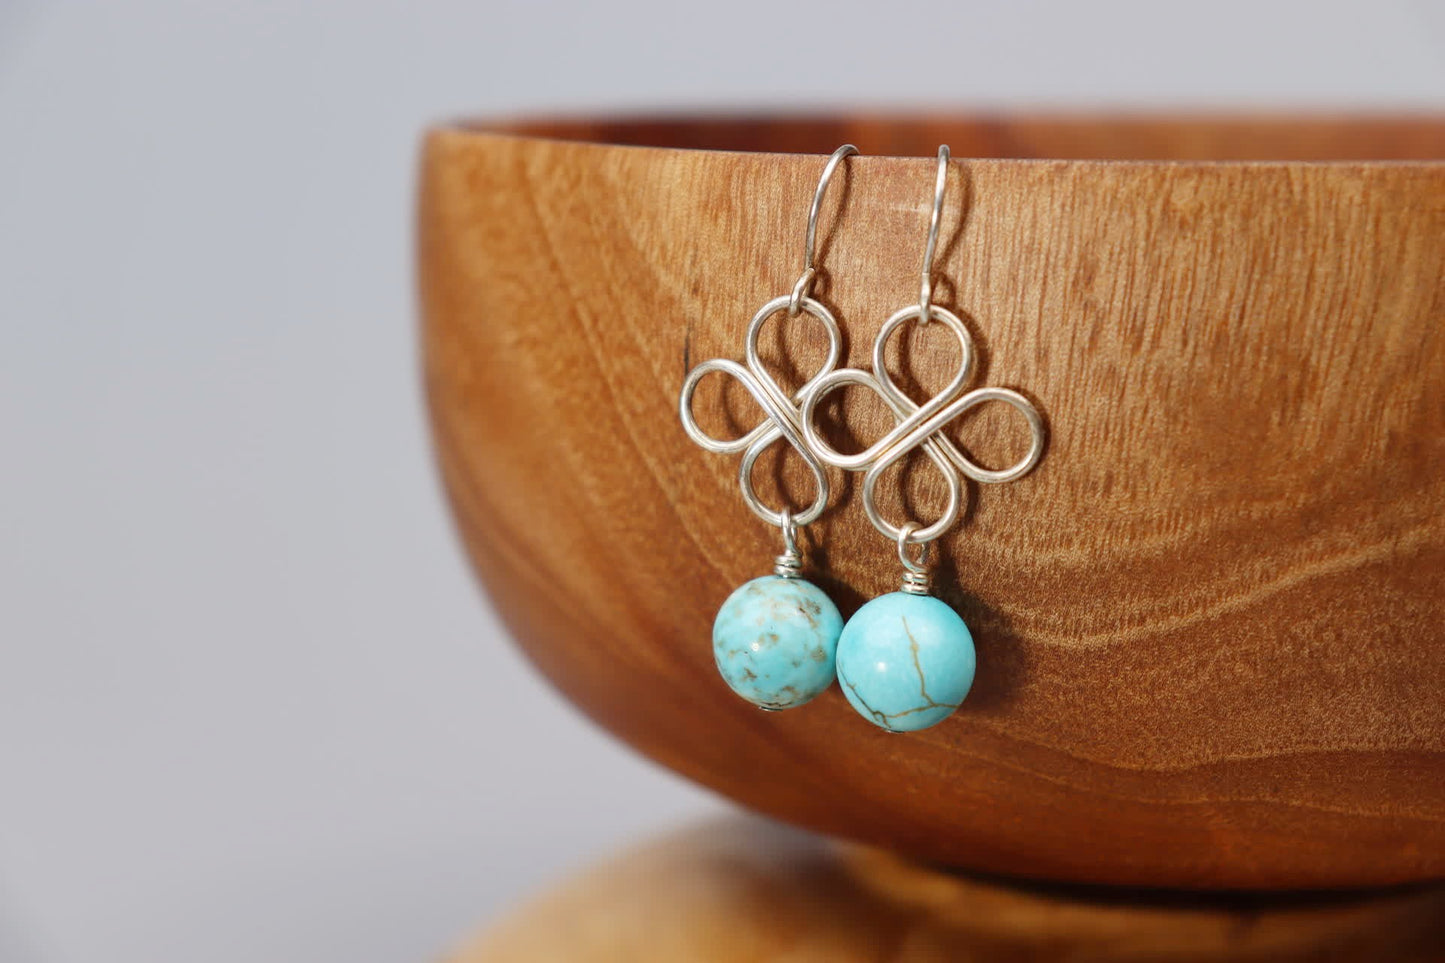 Clover Sterling Silver and Turquoise Earrings